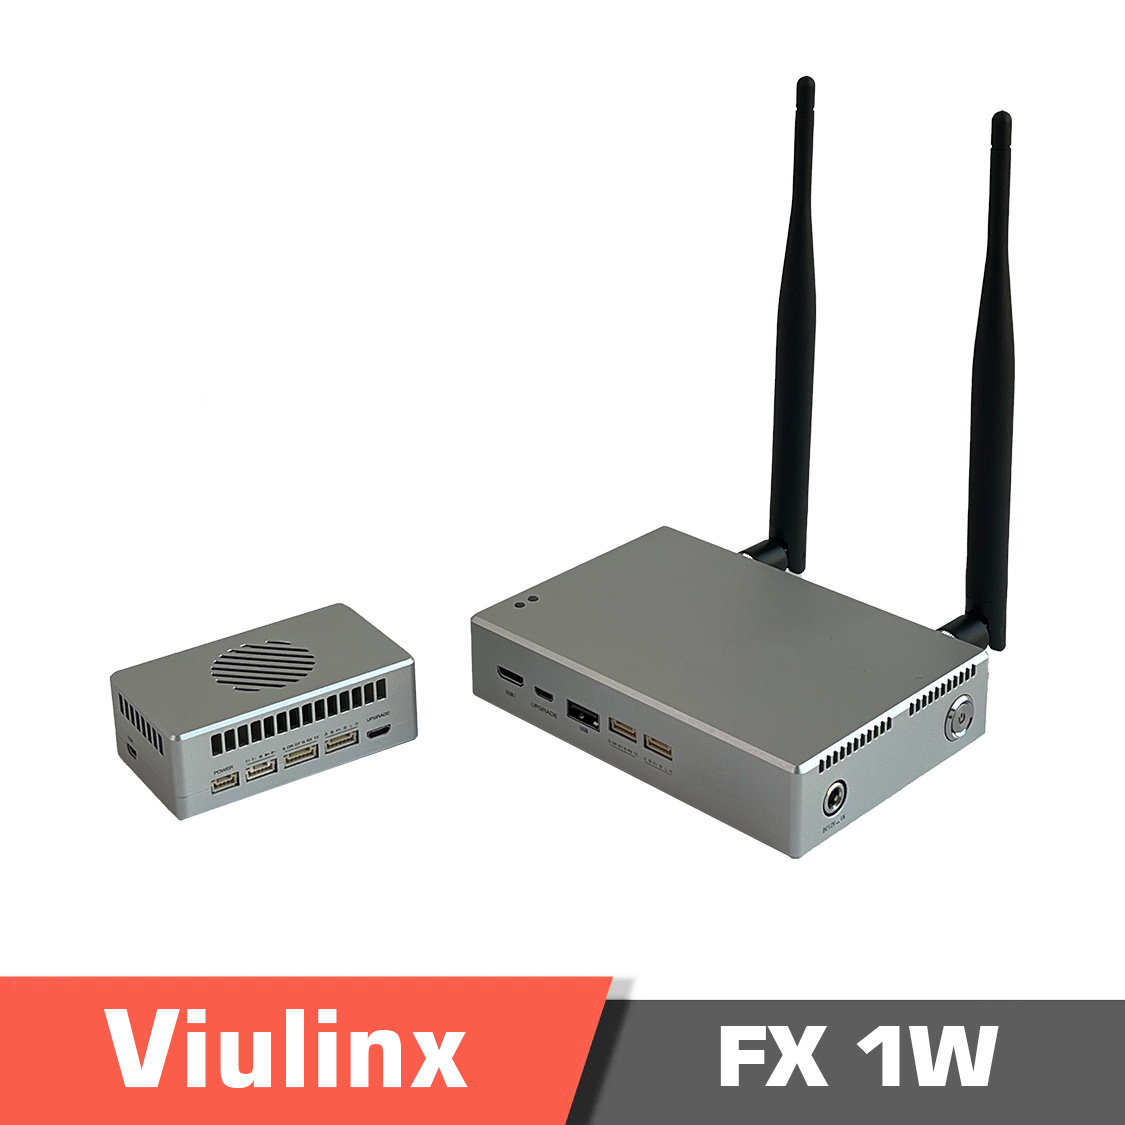 Viulinx - speedybee tx800,speedybee tx800 vtx,speedybee tx800 long range transmitter,digital link equipment,long range,point to point,coastal inspection,aerial mapping,pipeline inspection,fire application,disaster rescue,delivery application,tramp support for rc fpv racing drone,rc fpv racing drone - motionew - 2